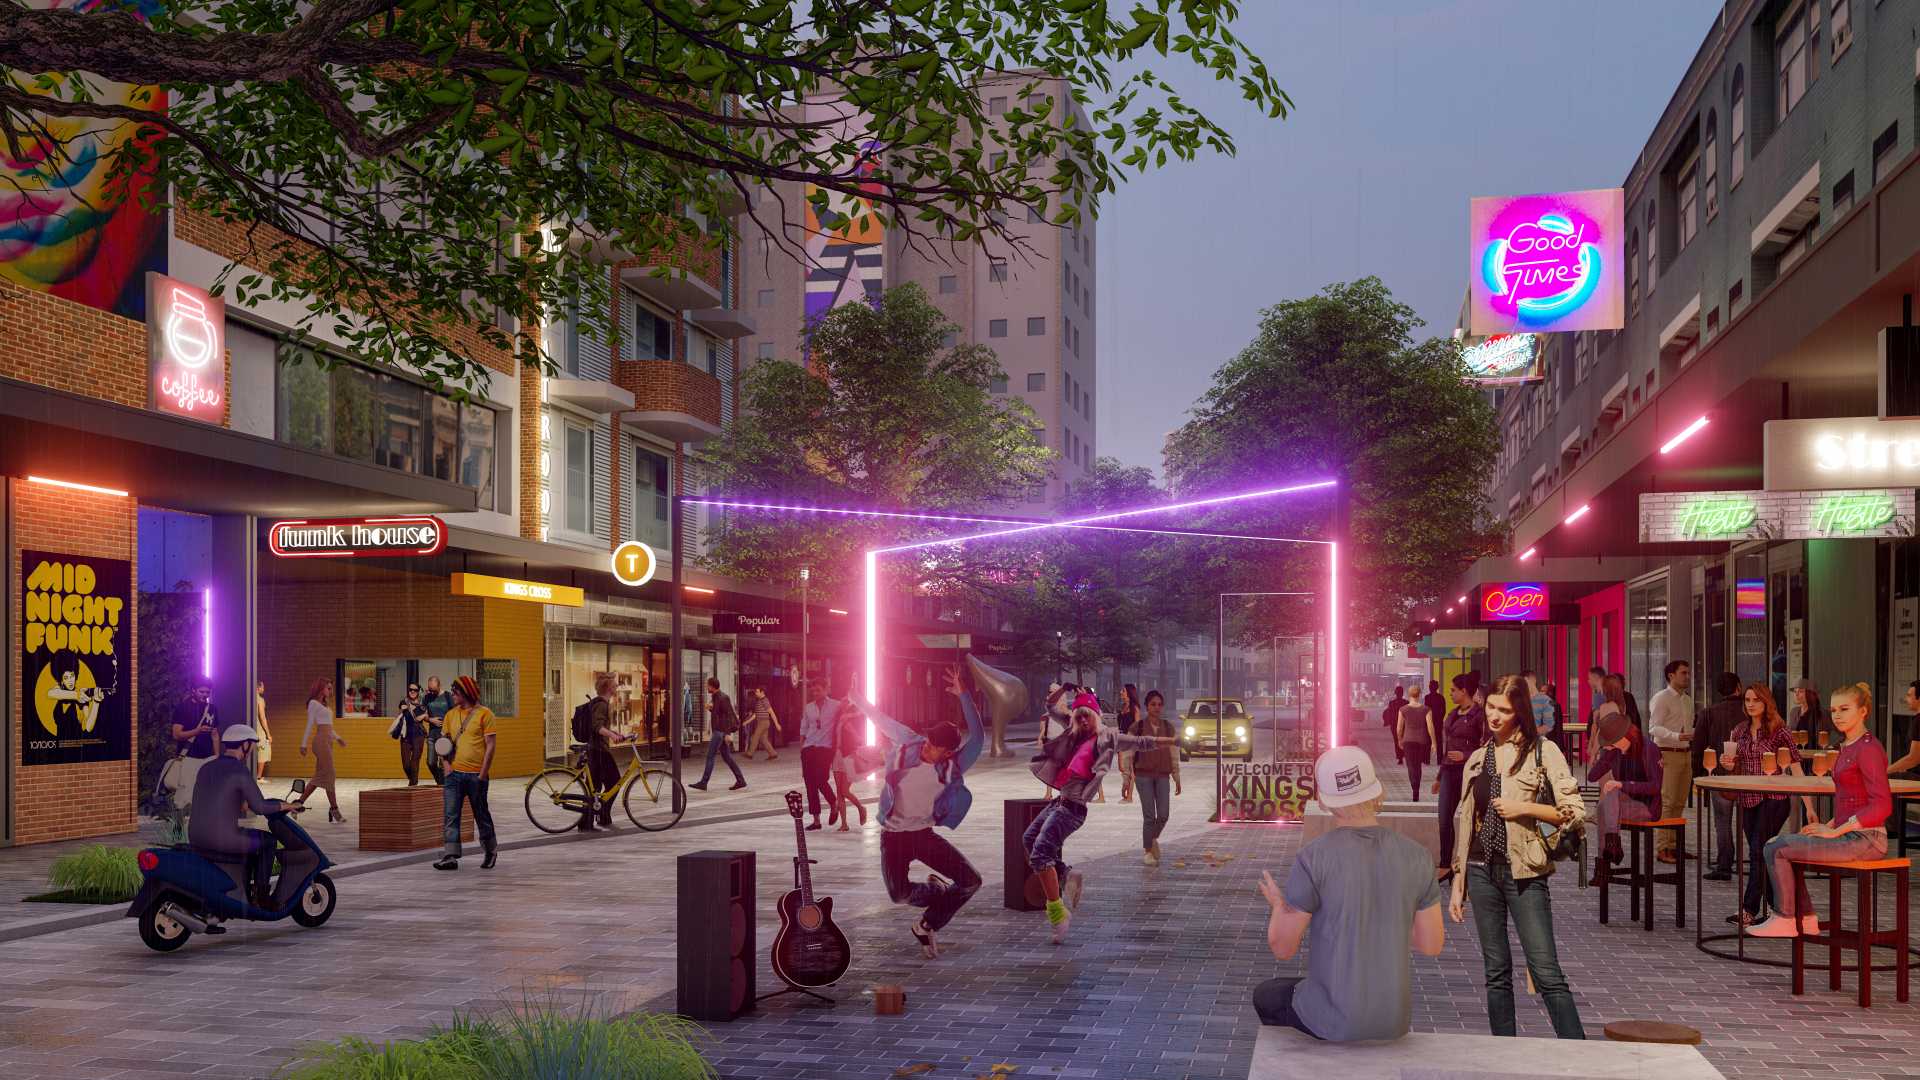 This Plan Proposes Revitalising Kings Cross with New Music Venues, Theatres and a Town Square